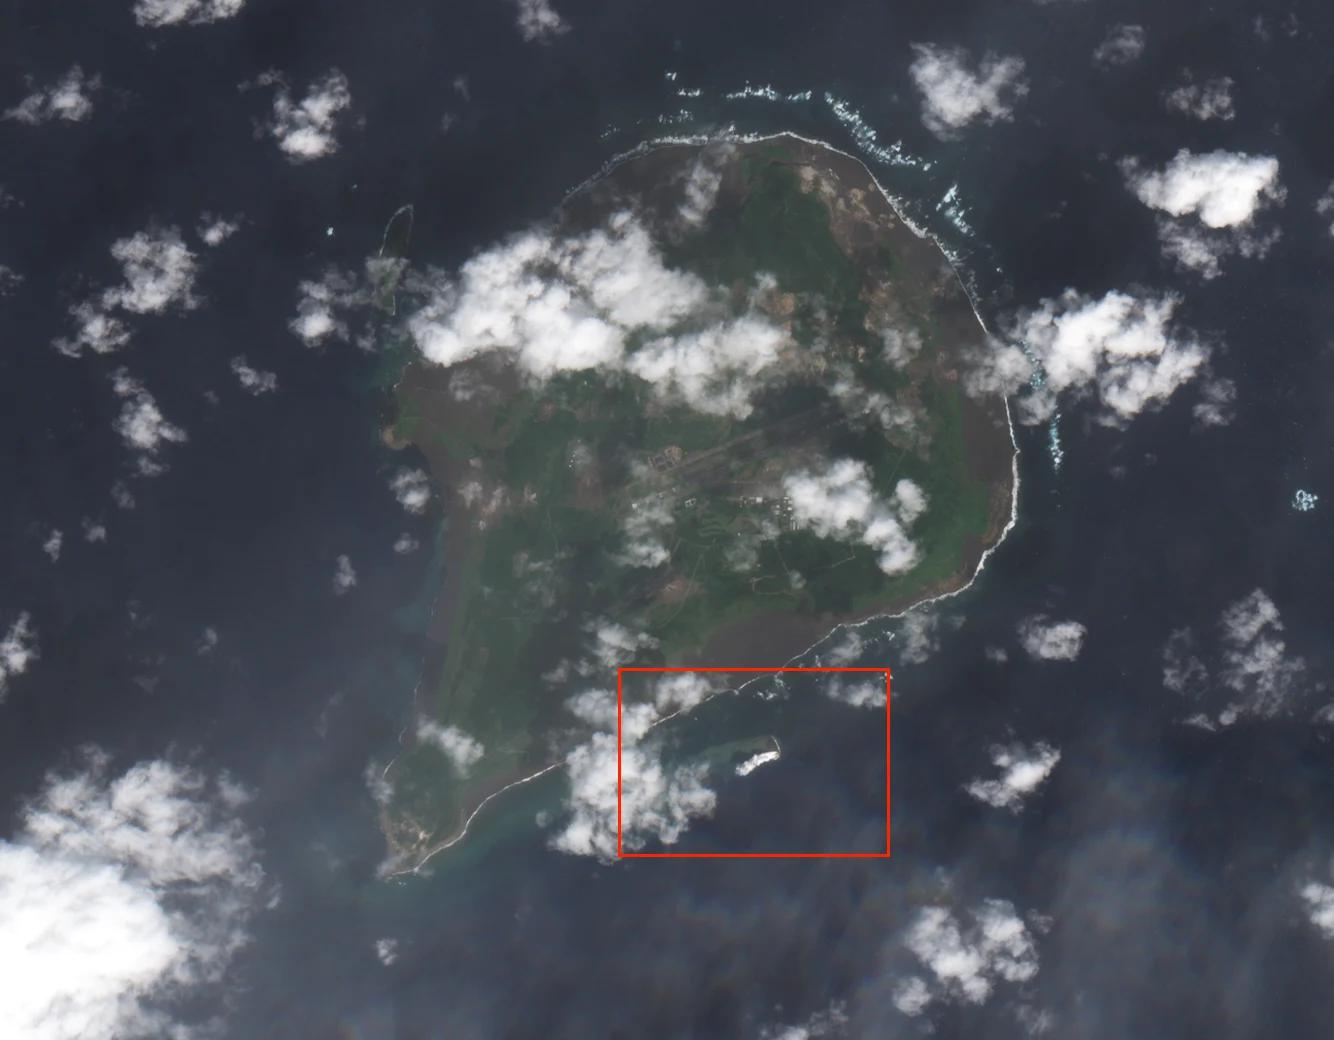 November 2 image of the new islet in the Pacific